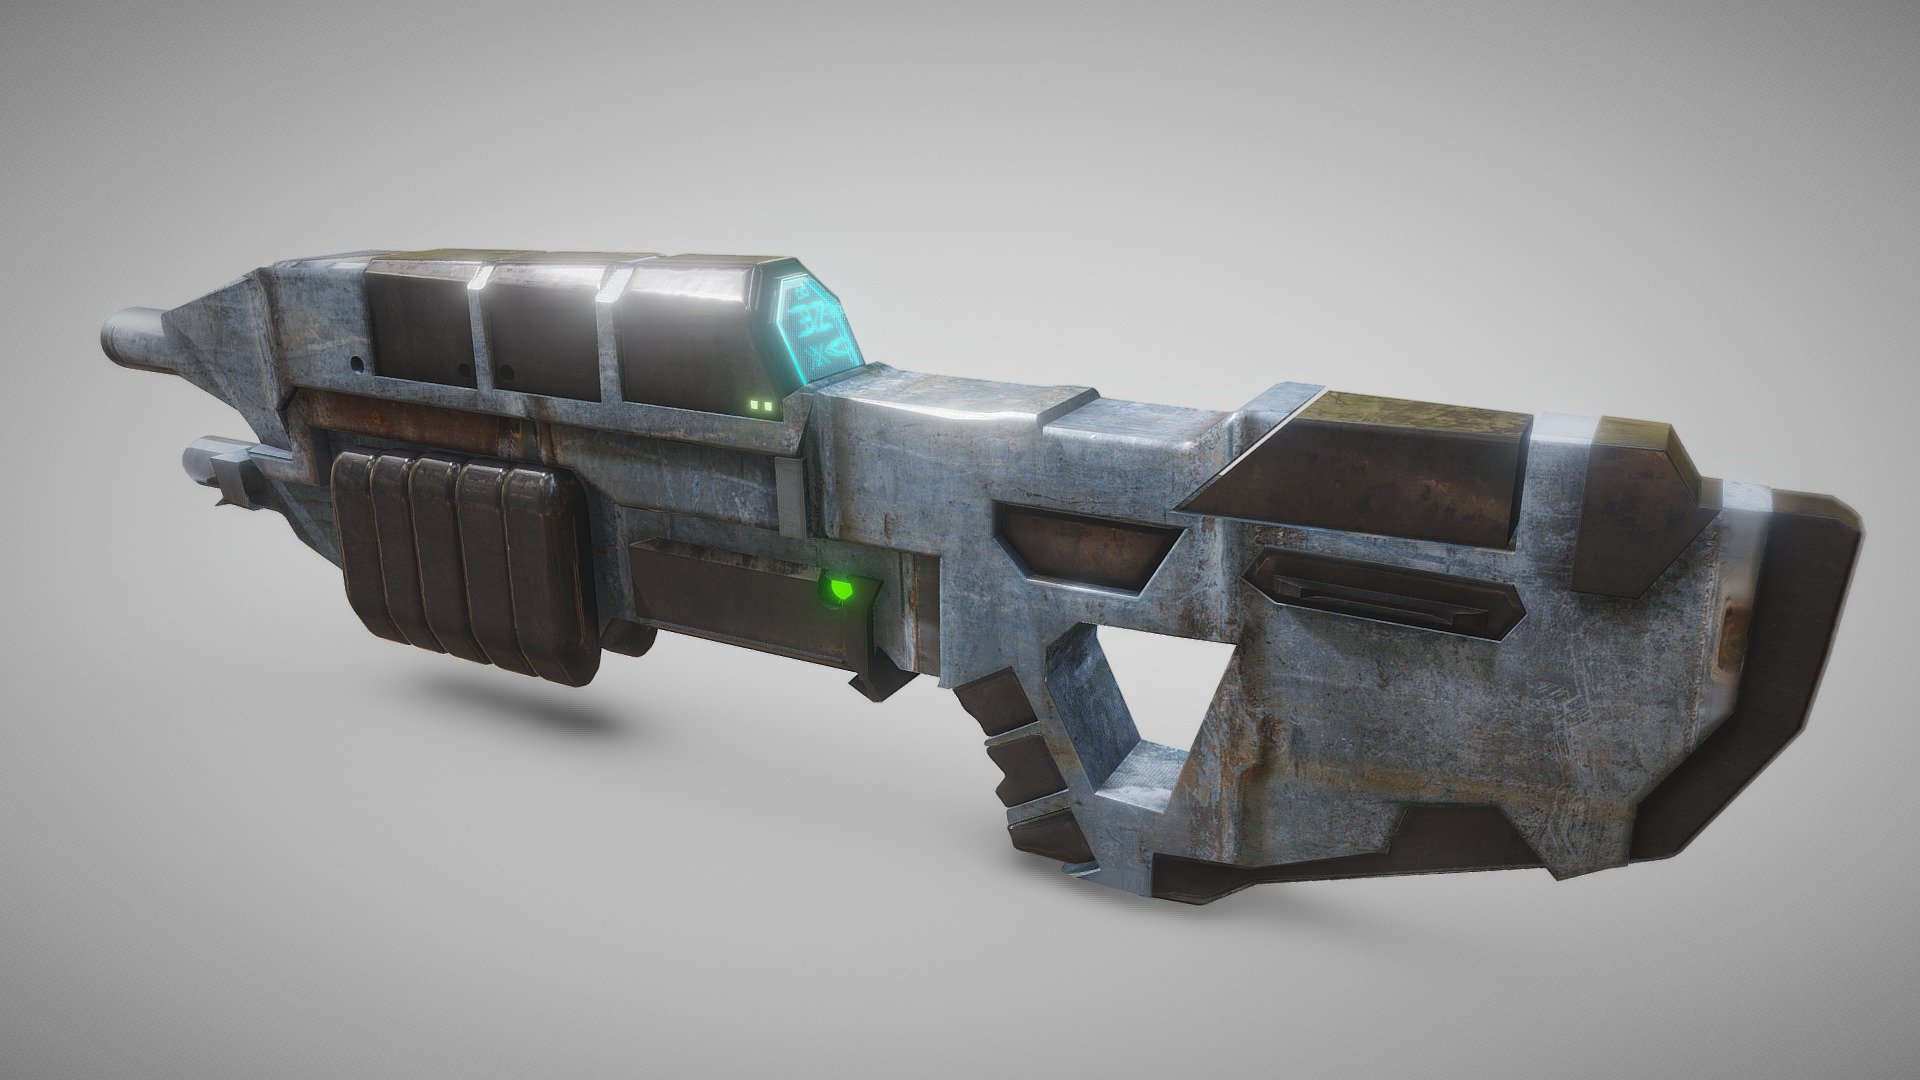 The epic rifle was found near a satellite planet of Ikoria 65. 

The technology was reverse- engineered by Gallex industries during the last 2 years 3d model